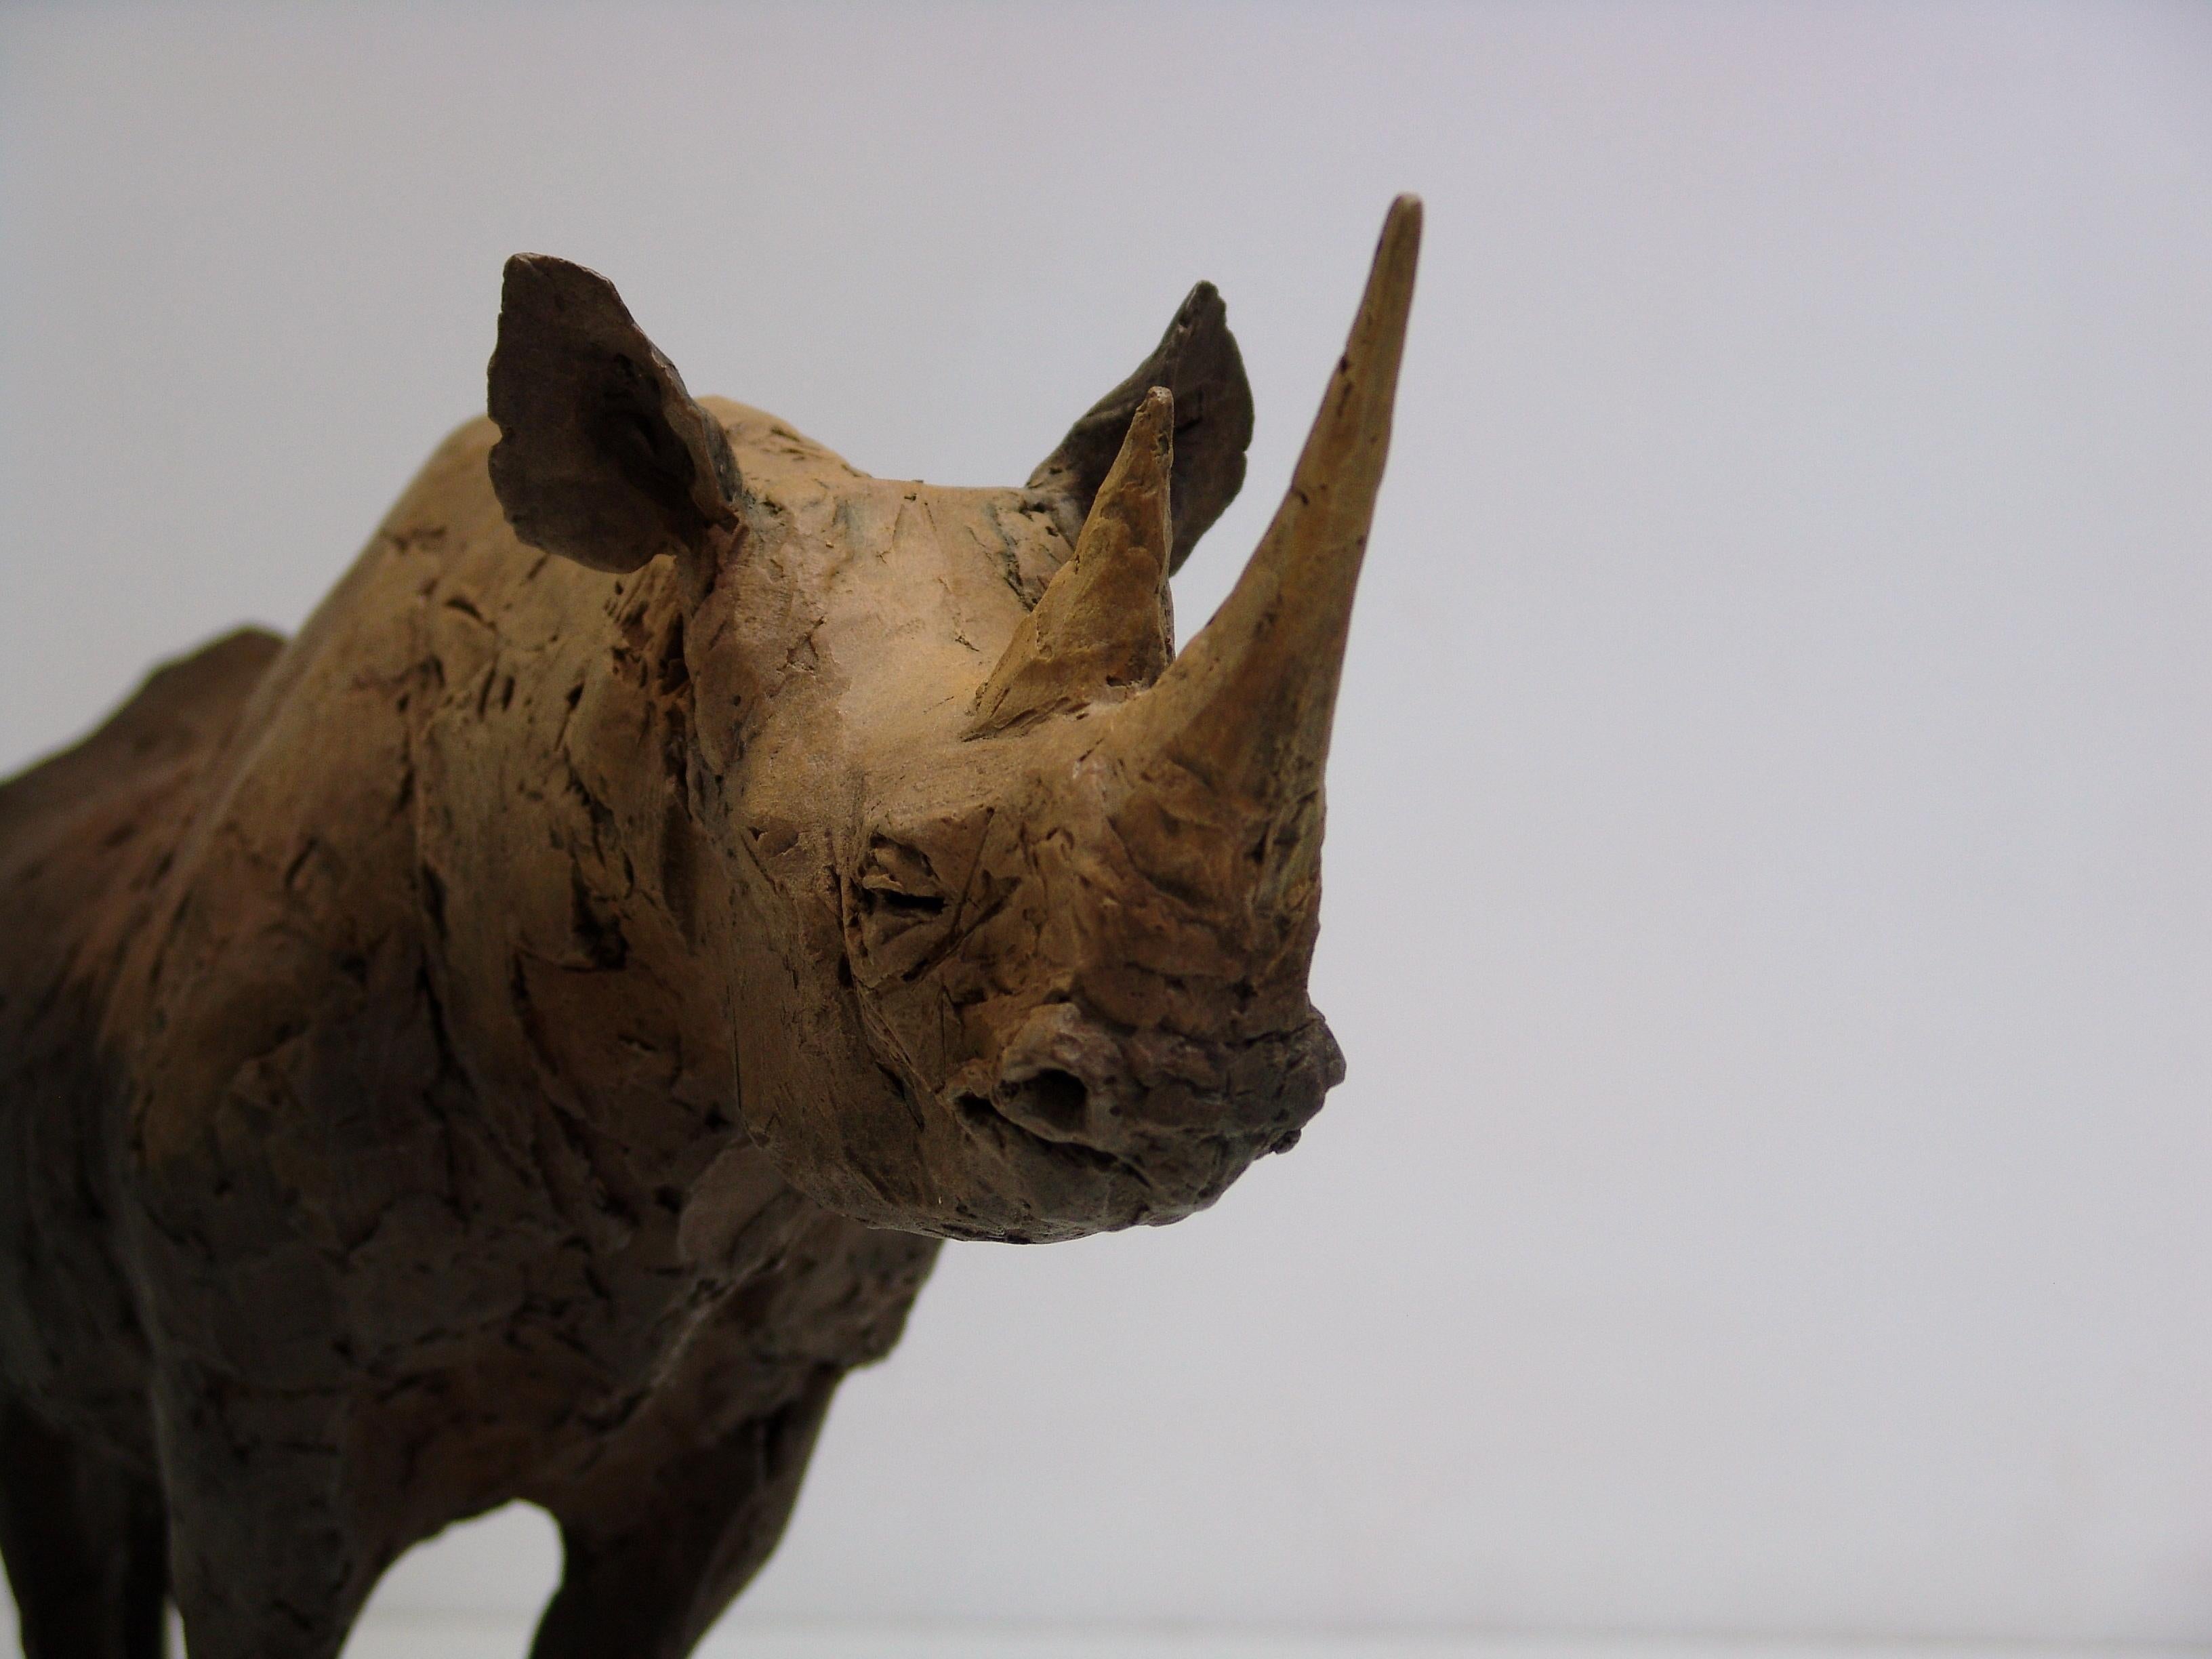 Nichola Theakston (1967) has established herself as one of the UK’s foremost contemporary sculptors working within the animal genre. 

With the ''Still Rhino'' Nichola shows how exquisite she can capture the feelings and expressions in an animal.